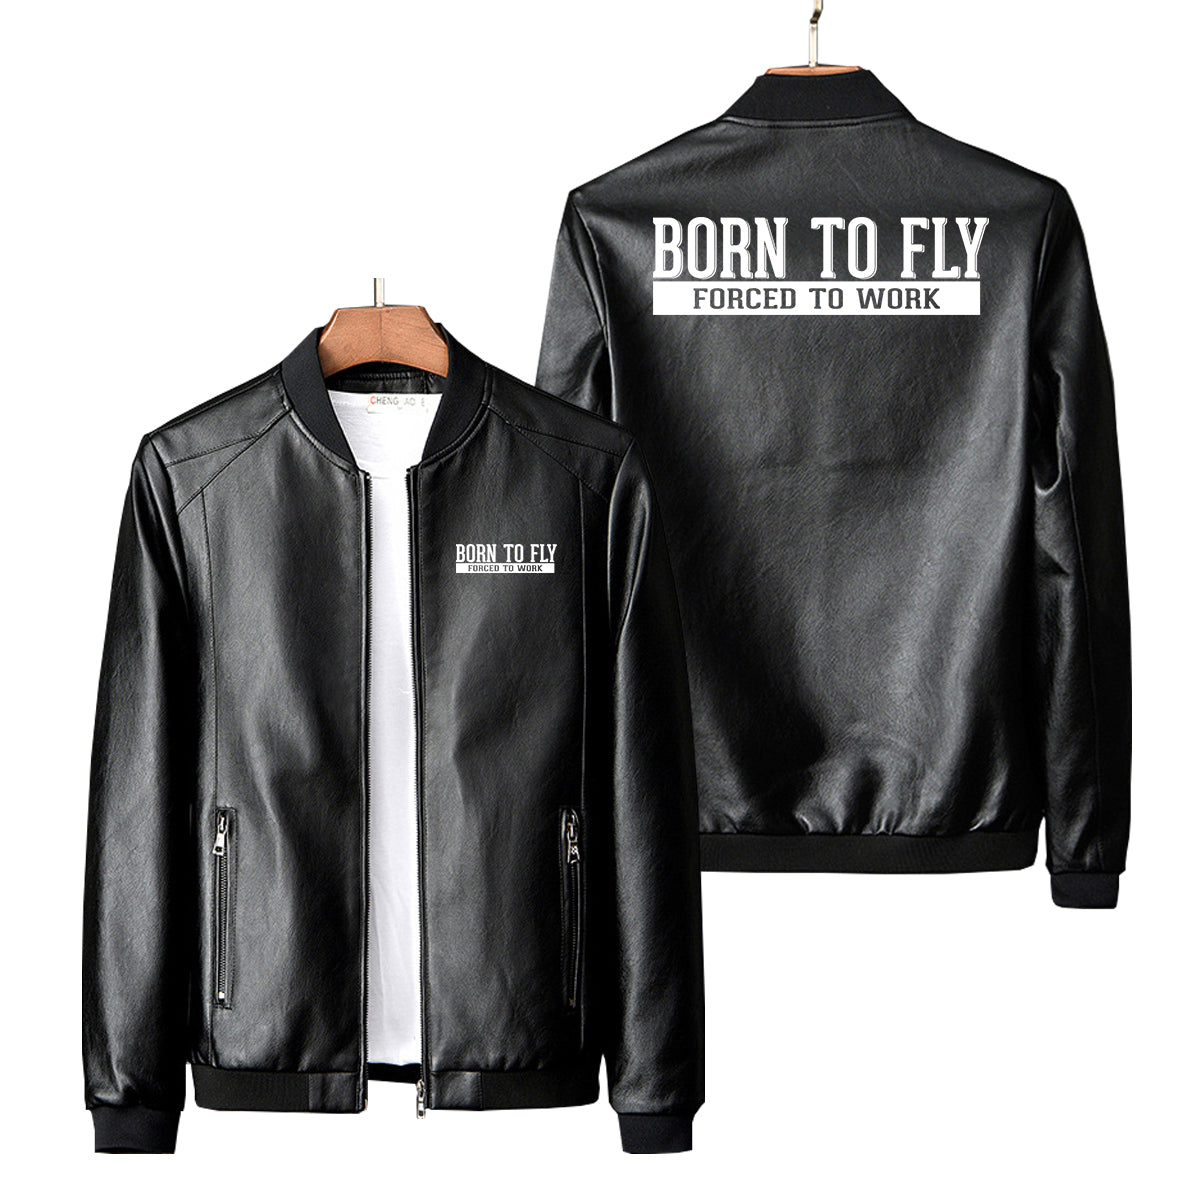 Born To Fly Forced To Work Designed PU Leather Jackets